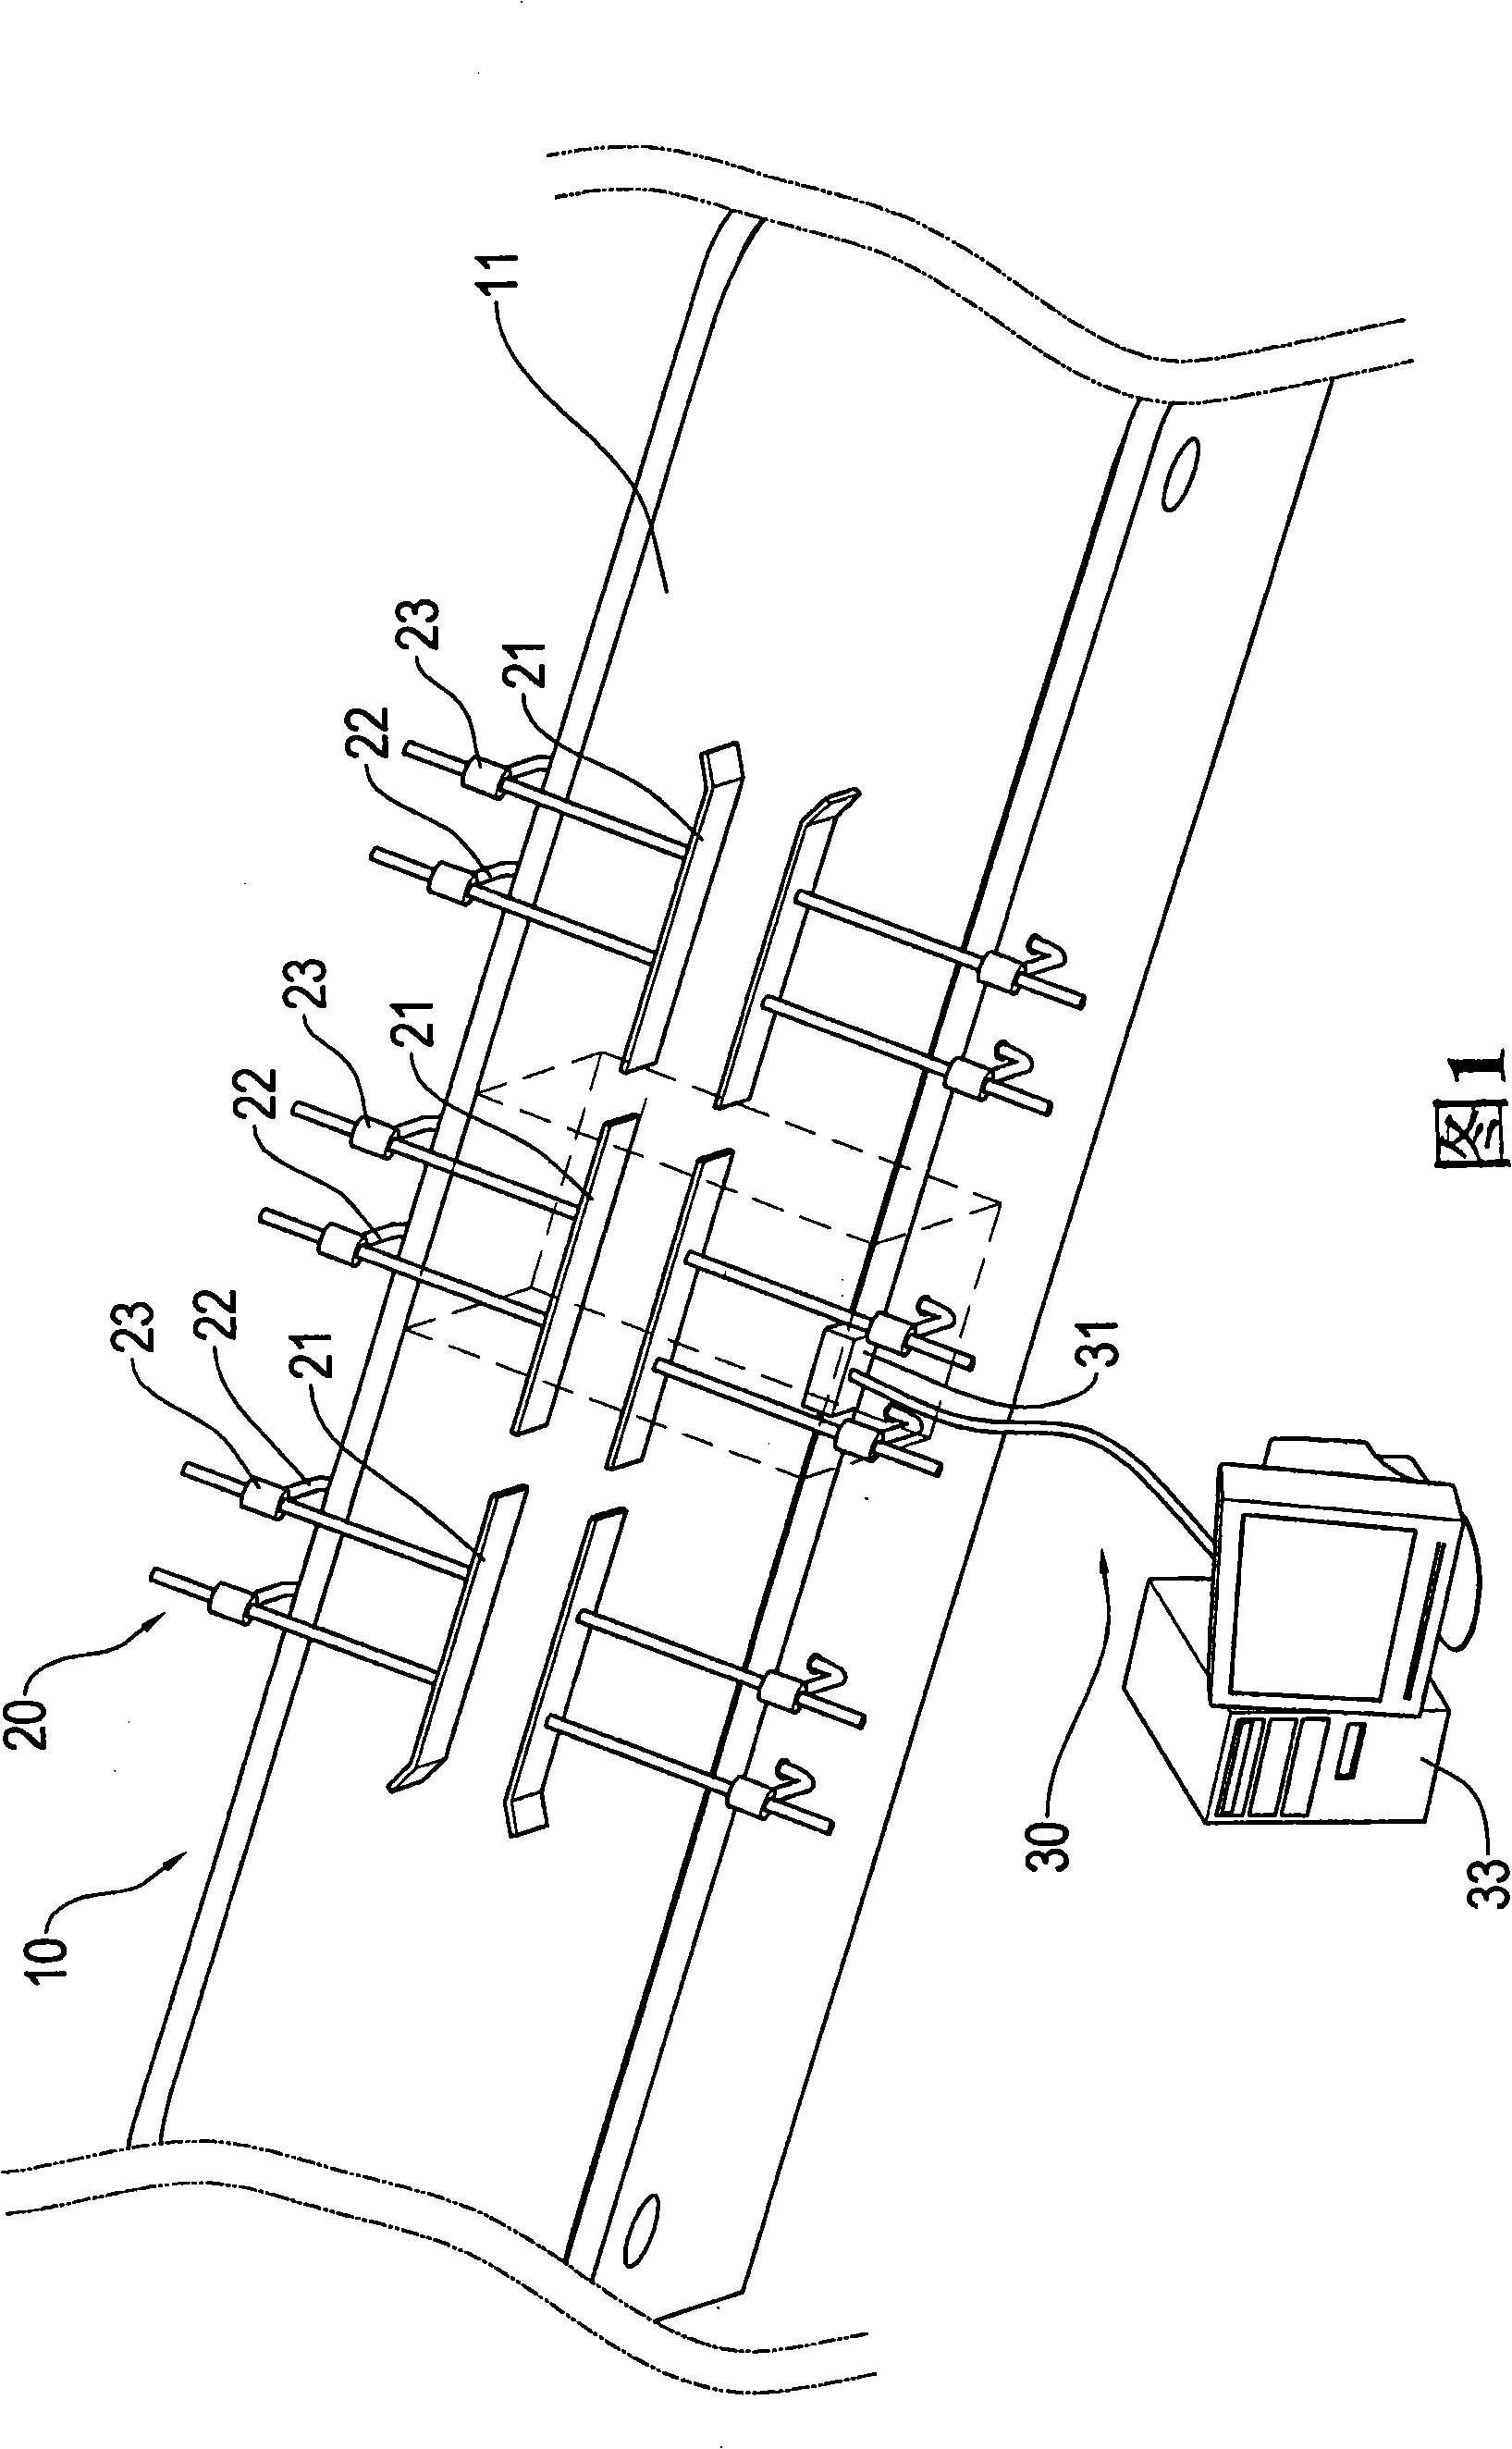 Testing device of electronic label and its method